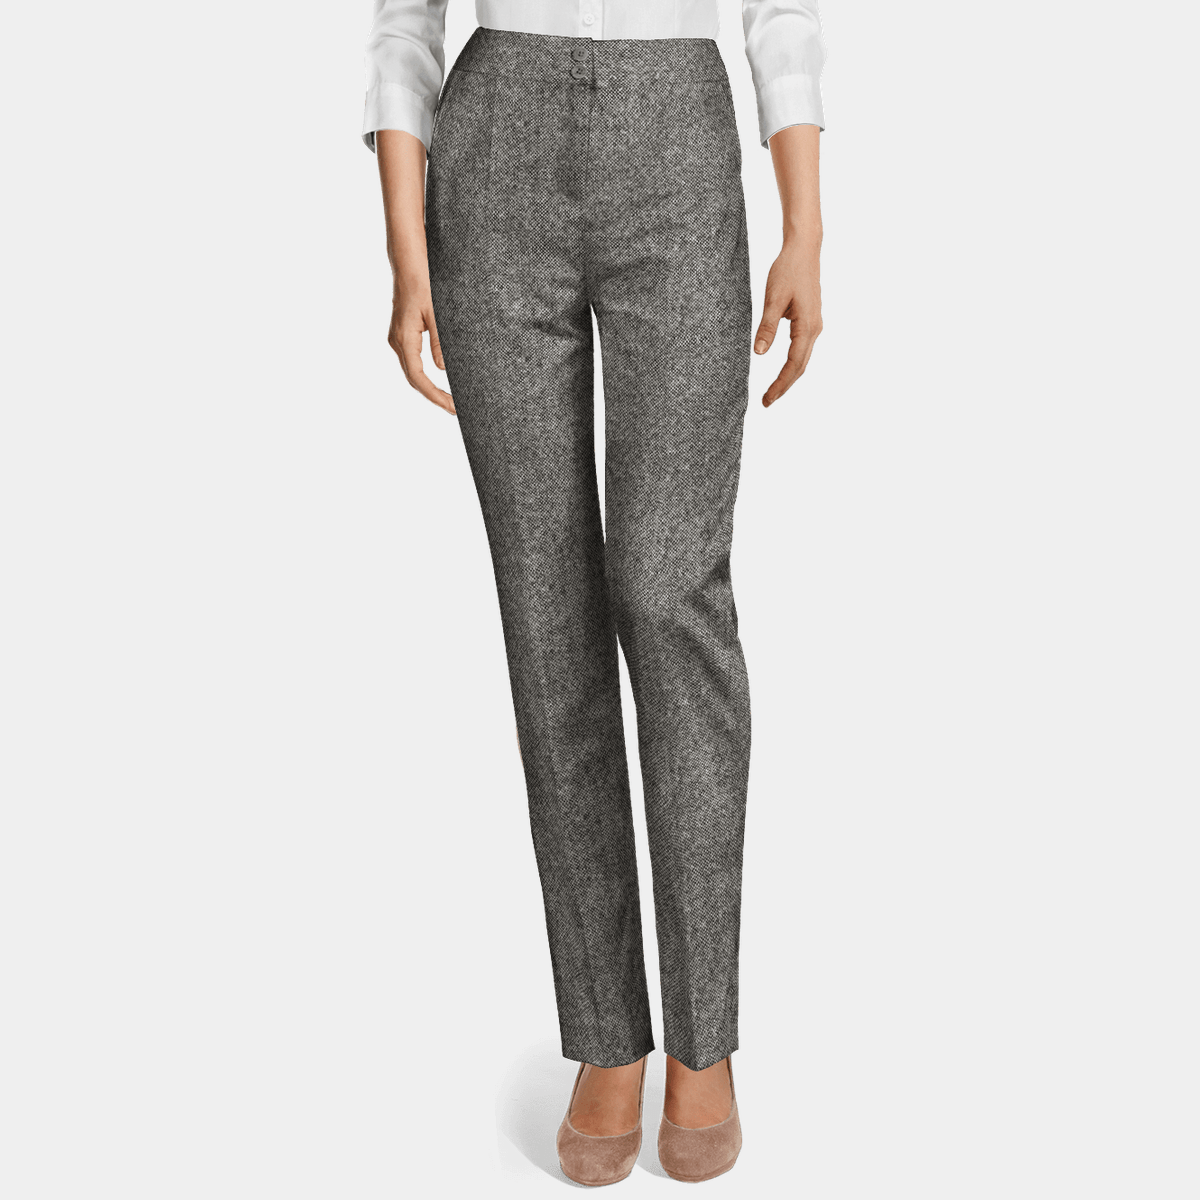 Brown donegal tweed high waisted flat-front Slacks